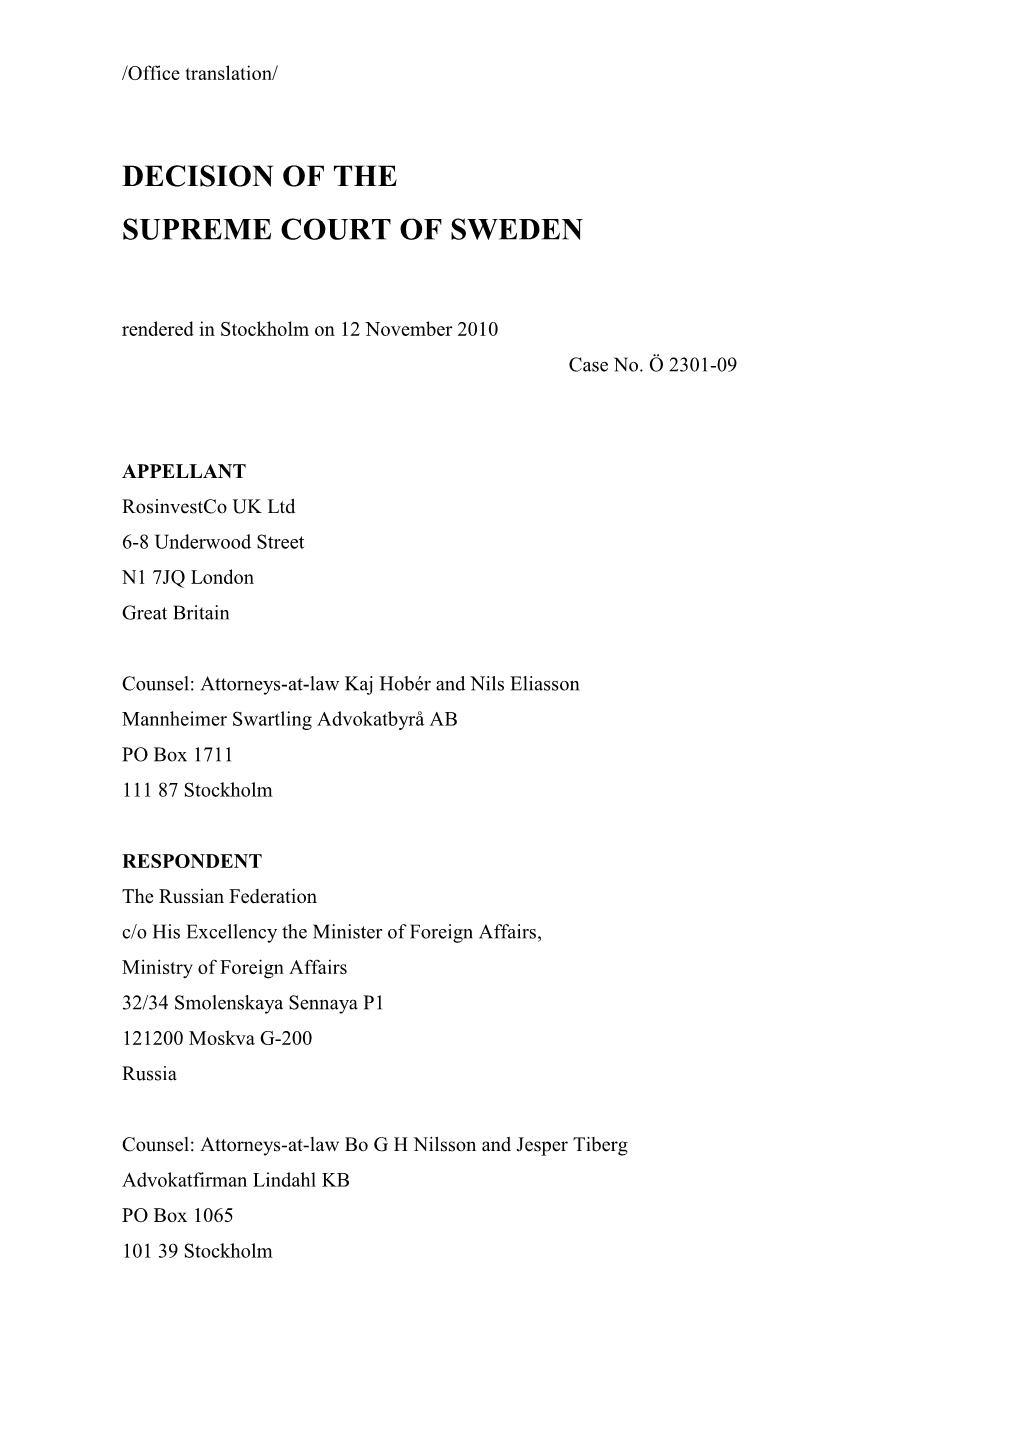 Decision of the Supreme Court of Sweden